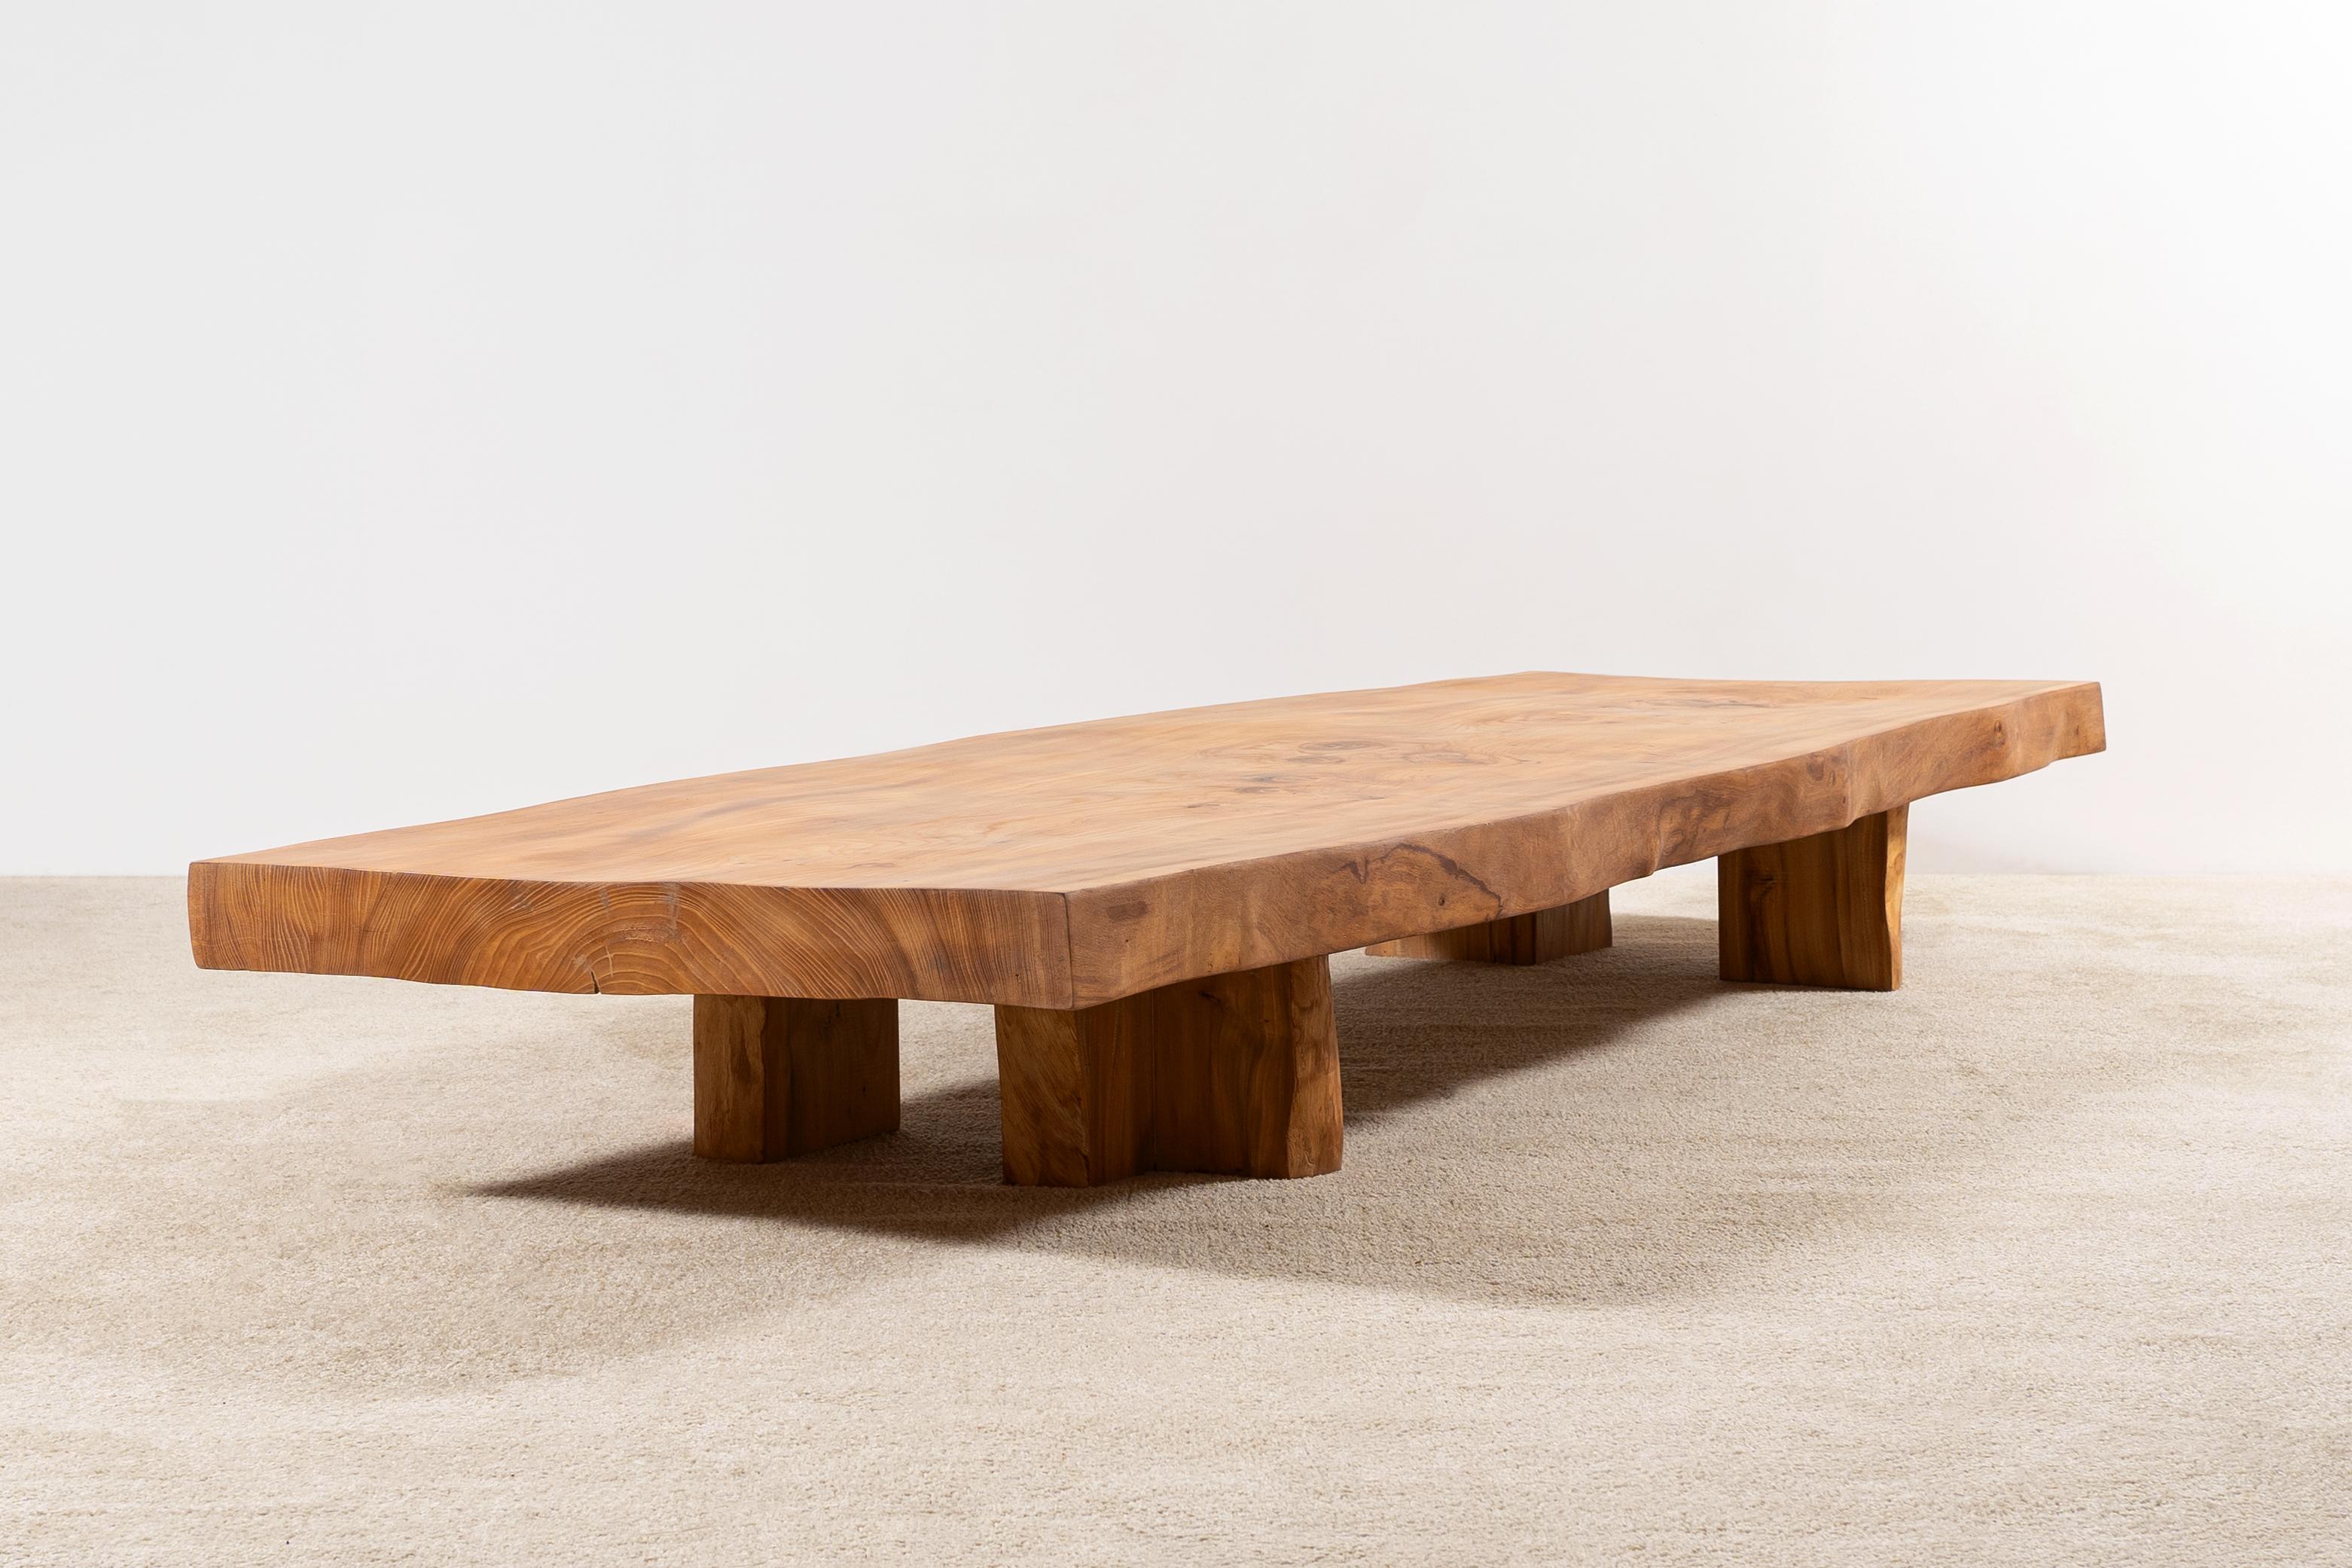 XXL Blond Elm Coffee Table. France, Circa 1950.

Very large Massive Blond Elm Coffee table sculpturally crafted by hand in a very minimalistic, Brutalist shaped style. Very atypical piece, Exceptional by the size. Exceptional by the preciousness